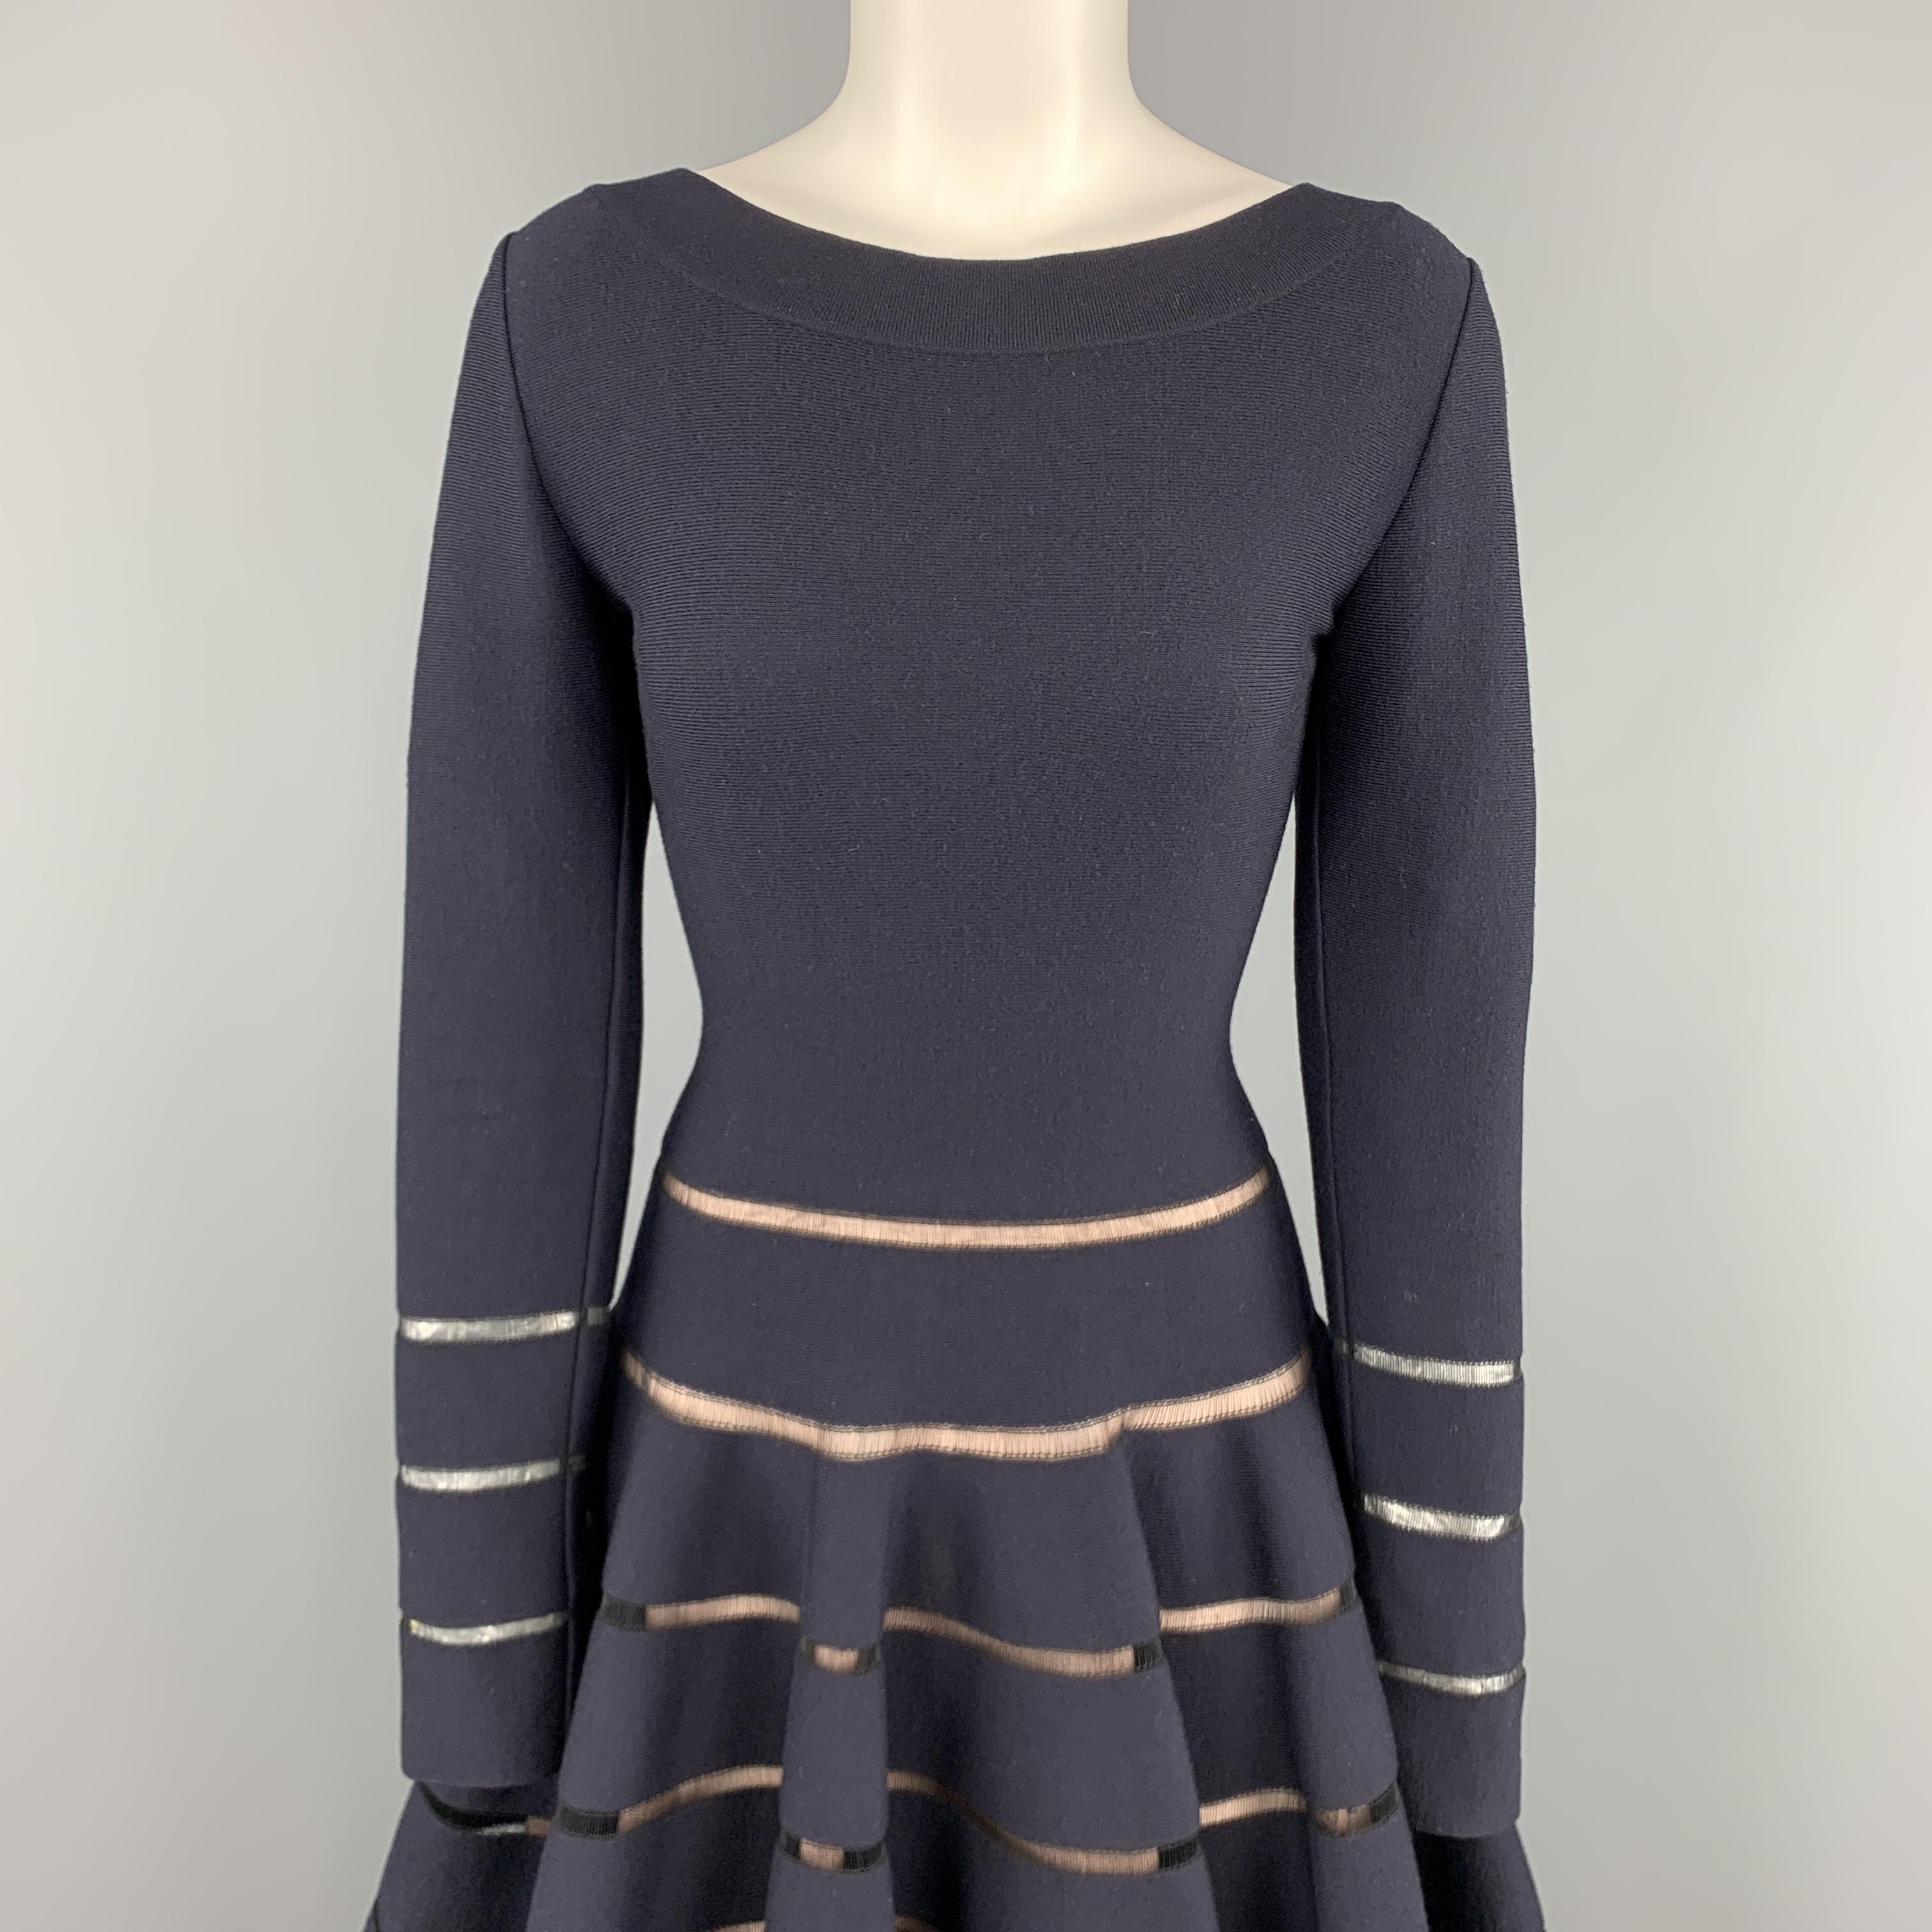 ALAIA fit flair dress come sin navy stretch wool knit with a boat neck, long sleeves, low V back, ruffled flair skirt, and sheer stripes. Made in Italy.

Very Good Pre-Owned Condition.
Marked: IT 44

Measurements:

Shoulder: 16 in.
Bust: 34